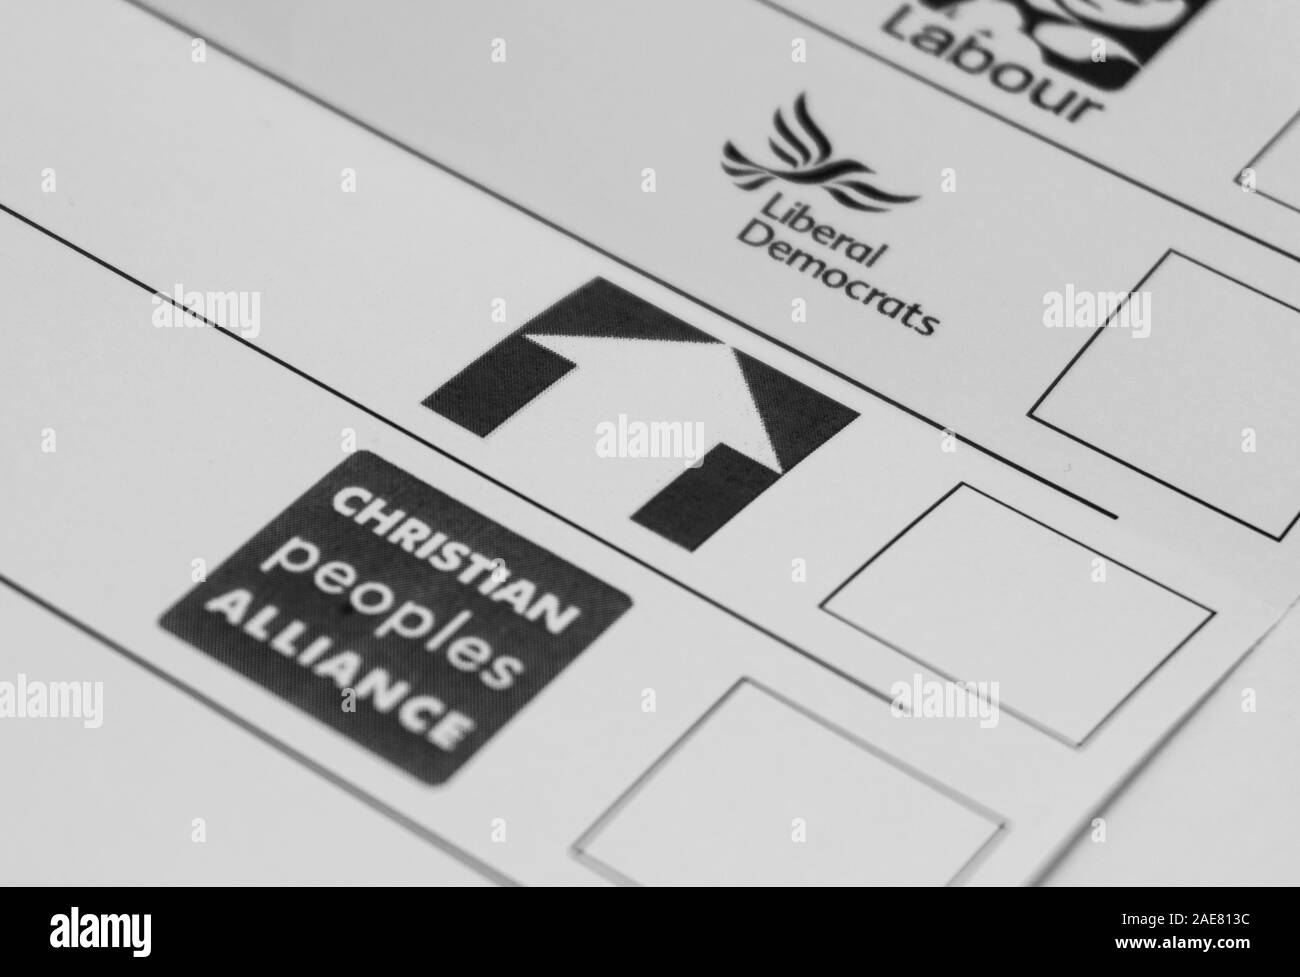 London / United Kingdom - December 7th 2019: Labour , liberal democrats, christian peoples alliance, young people party on general election ballot pap Stock Photo